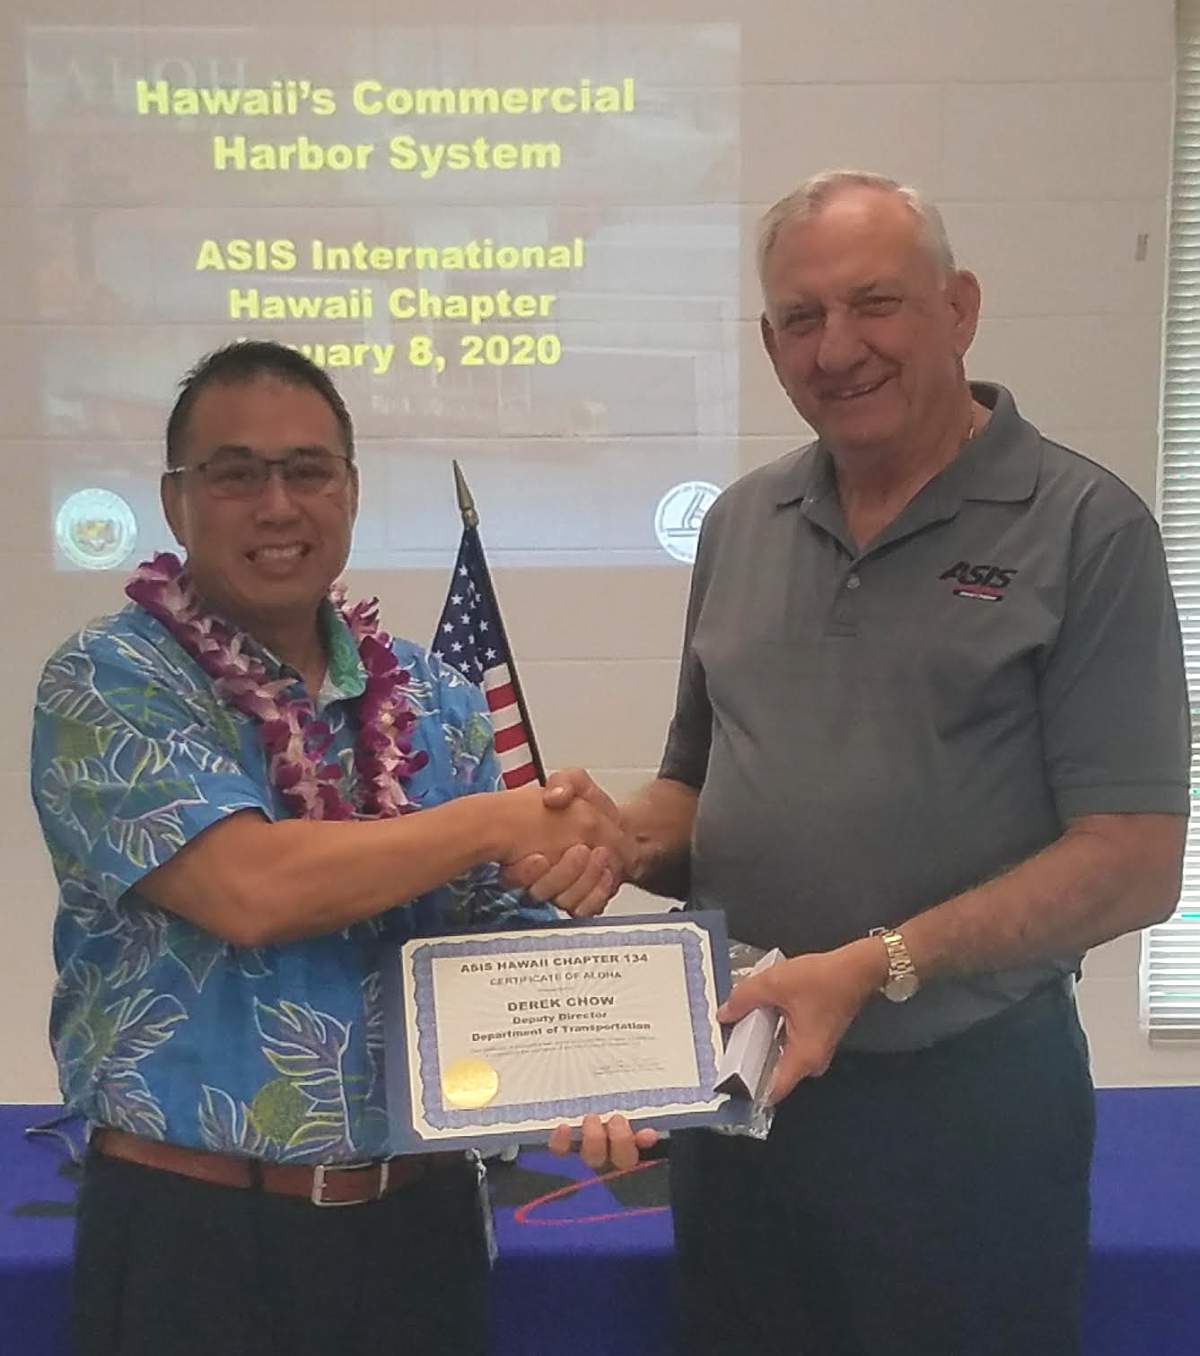 Derek Chow, Deputy Director at Harbors Division, Department of Transportation, State of Hawaii